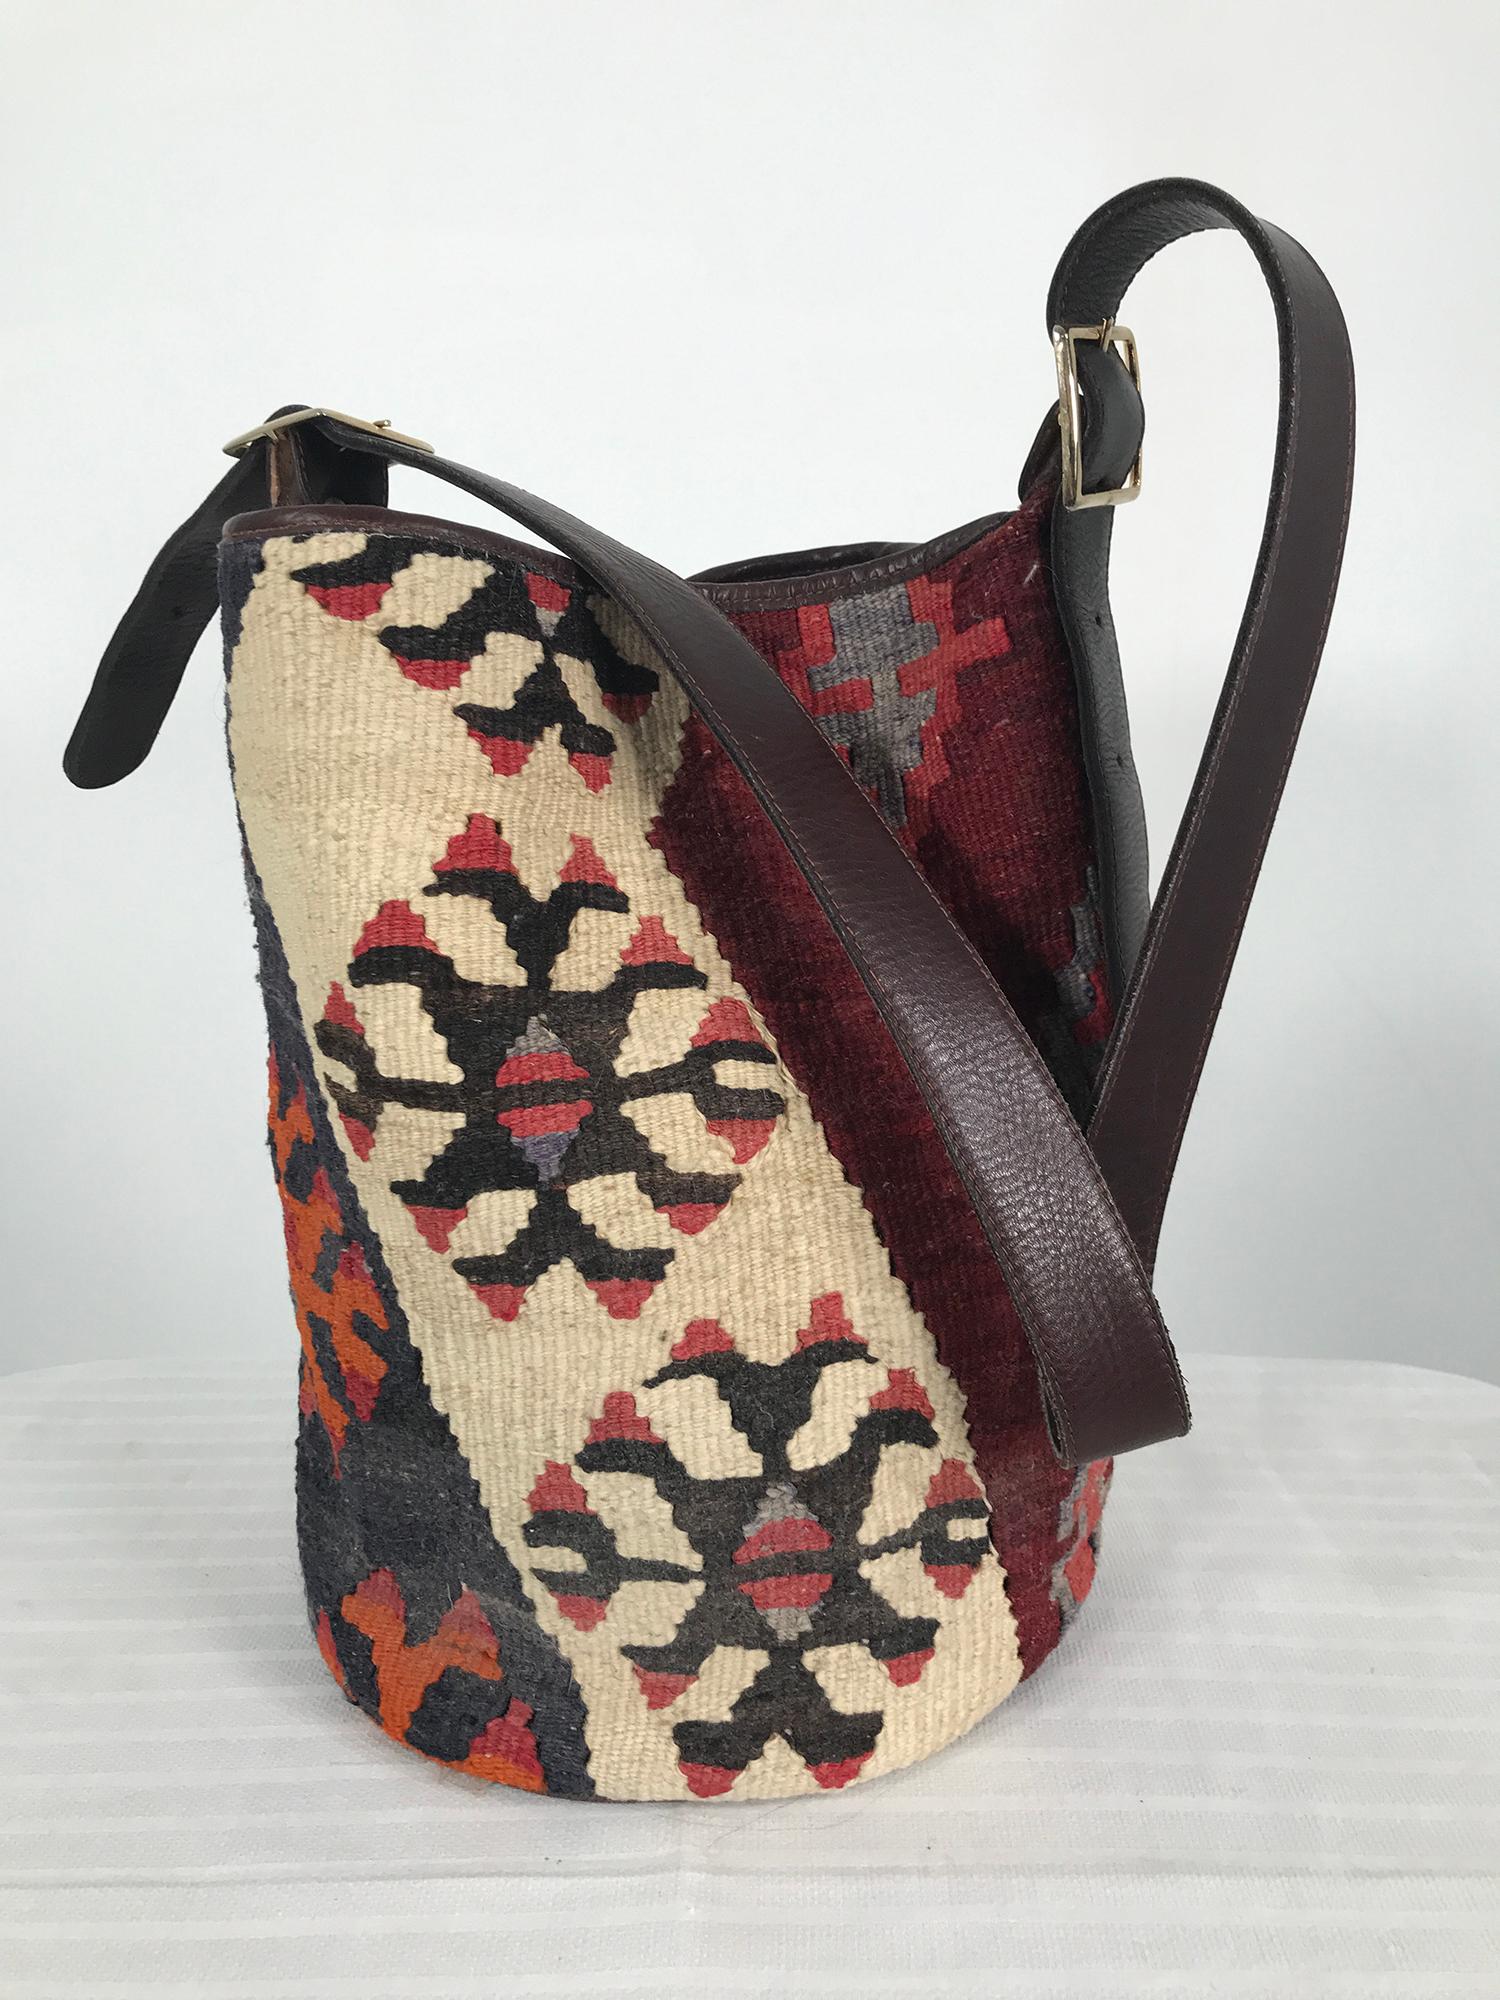 Vintage Turkish kilim rug with leather bucket shoulder bag. Woven wool kilim with leather trim, bottom and adjustable strap. The bag closes at the top with a zipper, it is lined in brown velvet like fabric, there is a single zipper compartment. The